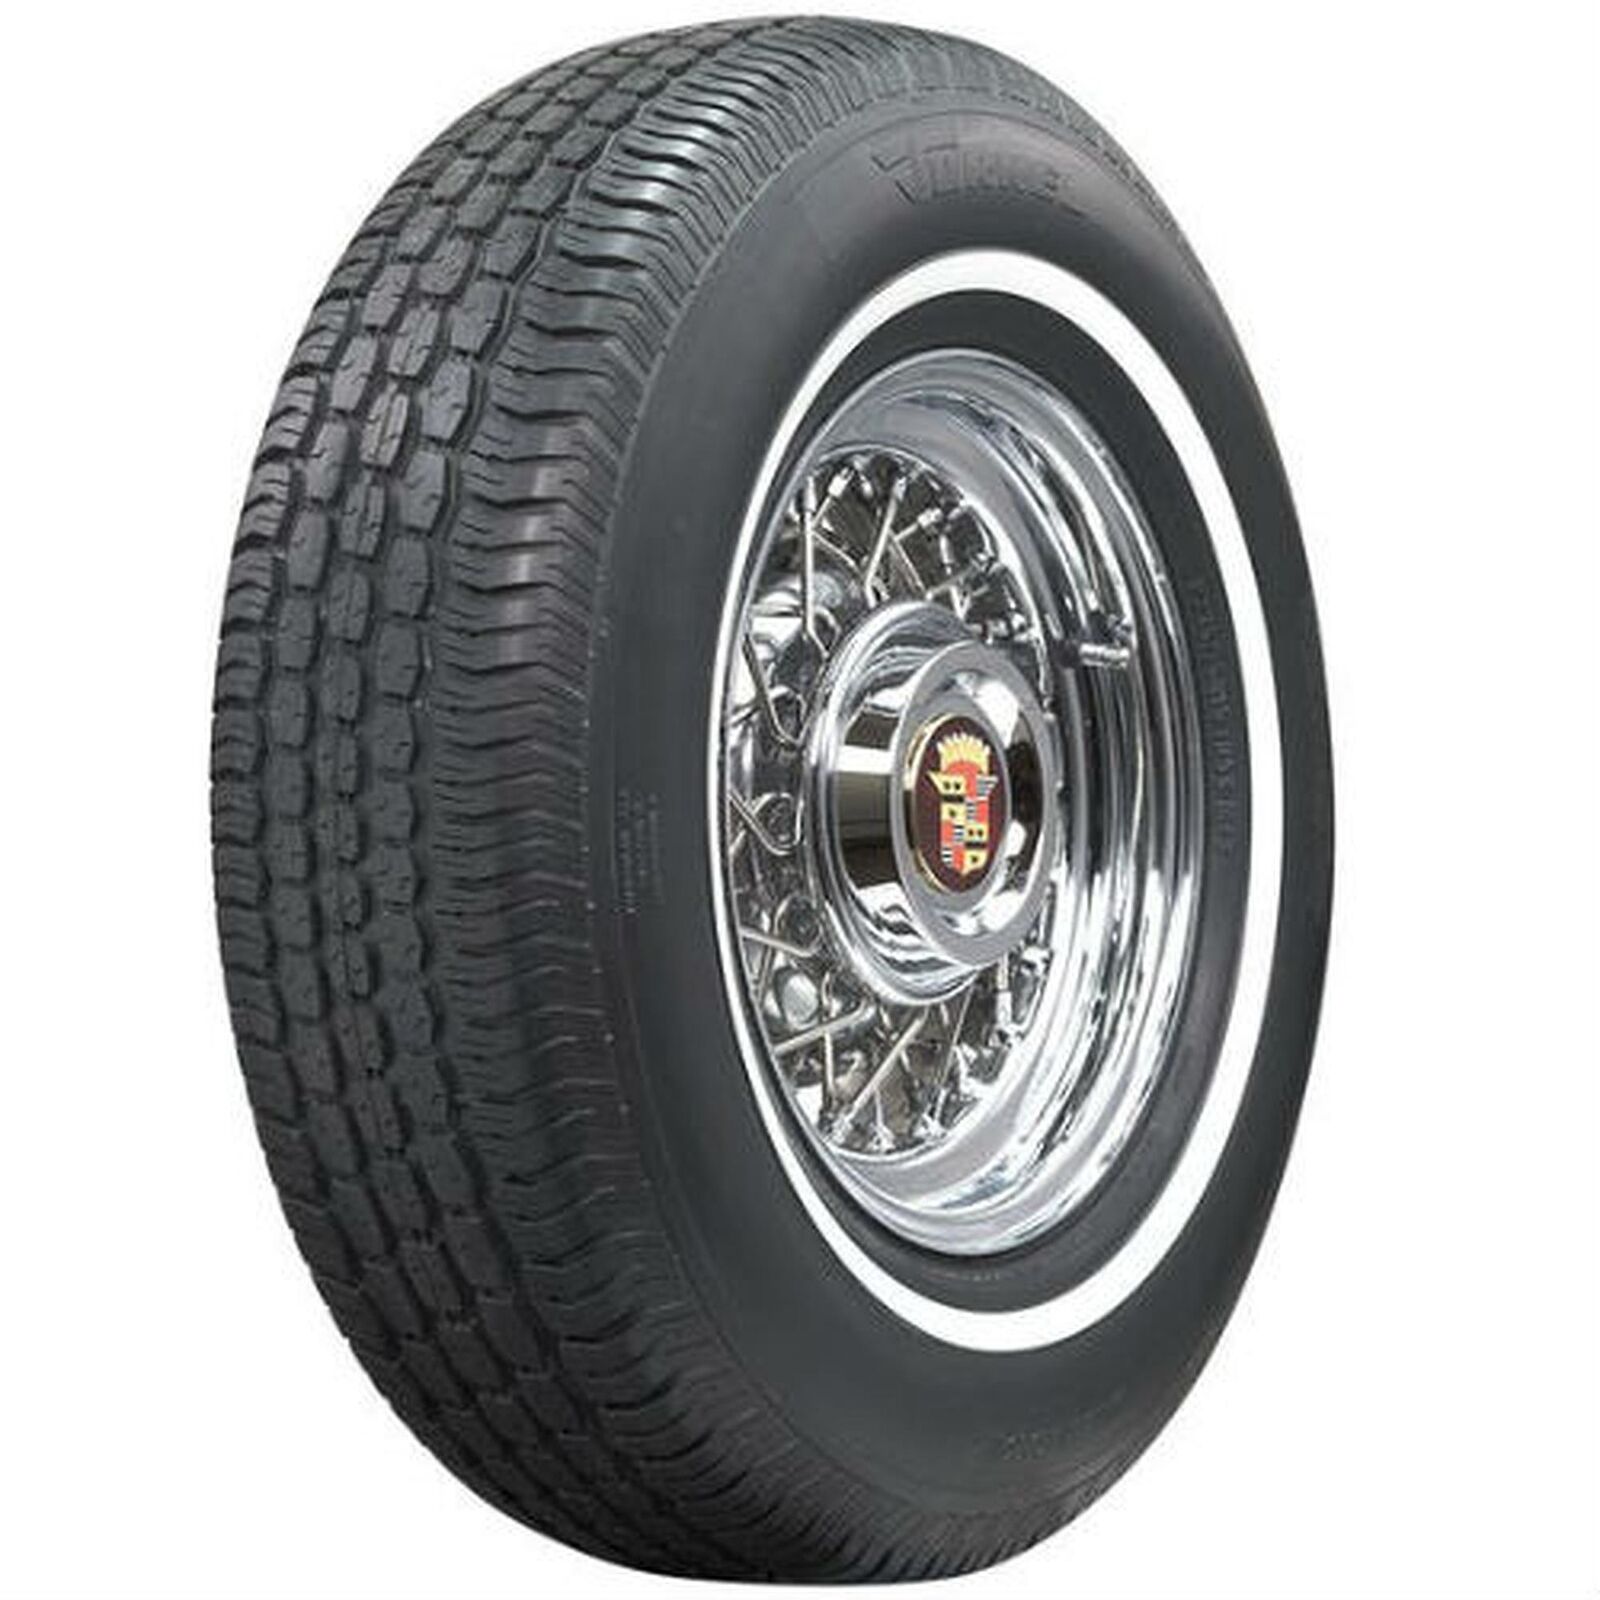 4 New Tornel Classic  - 185/75r14 Tires 1857514 185 75 14